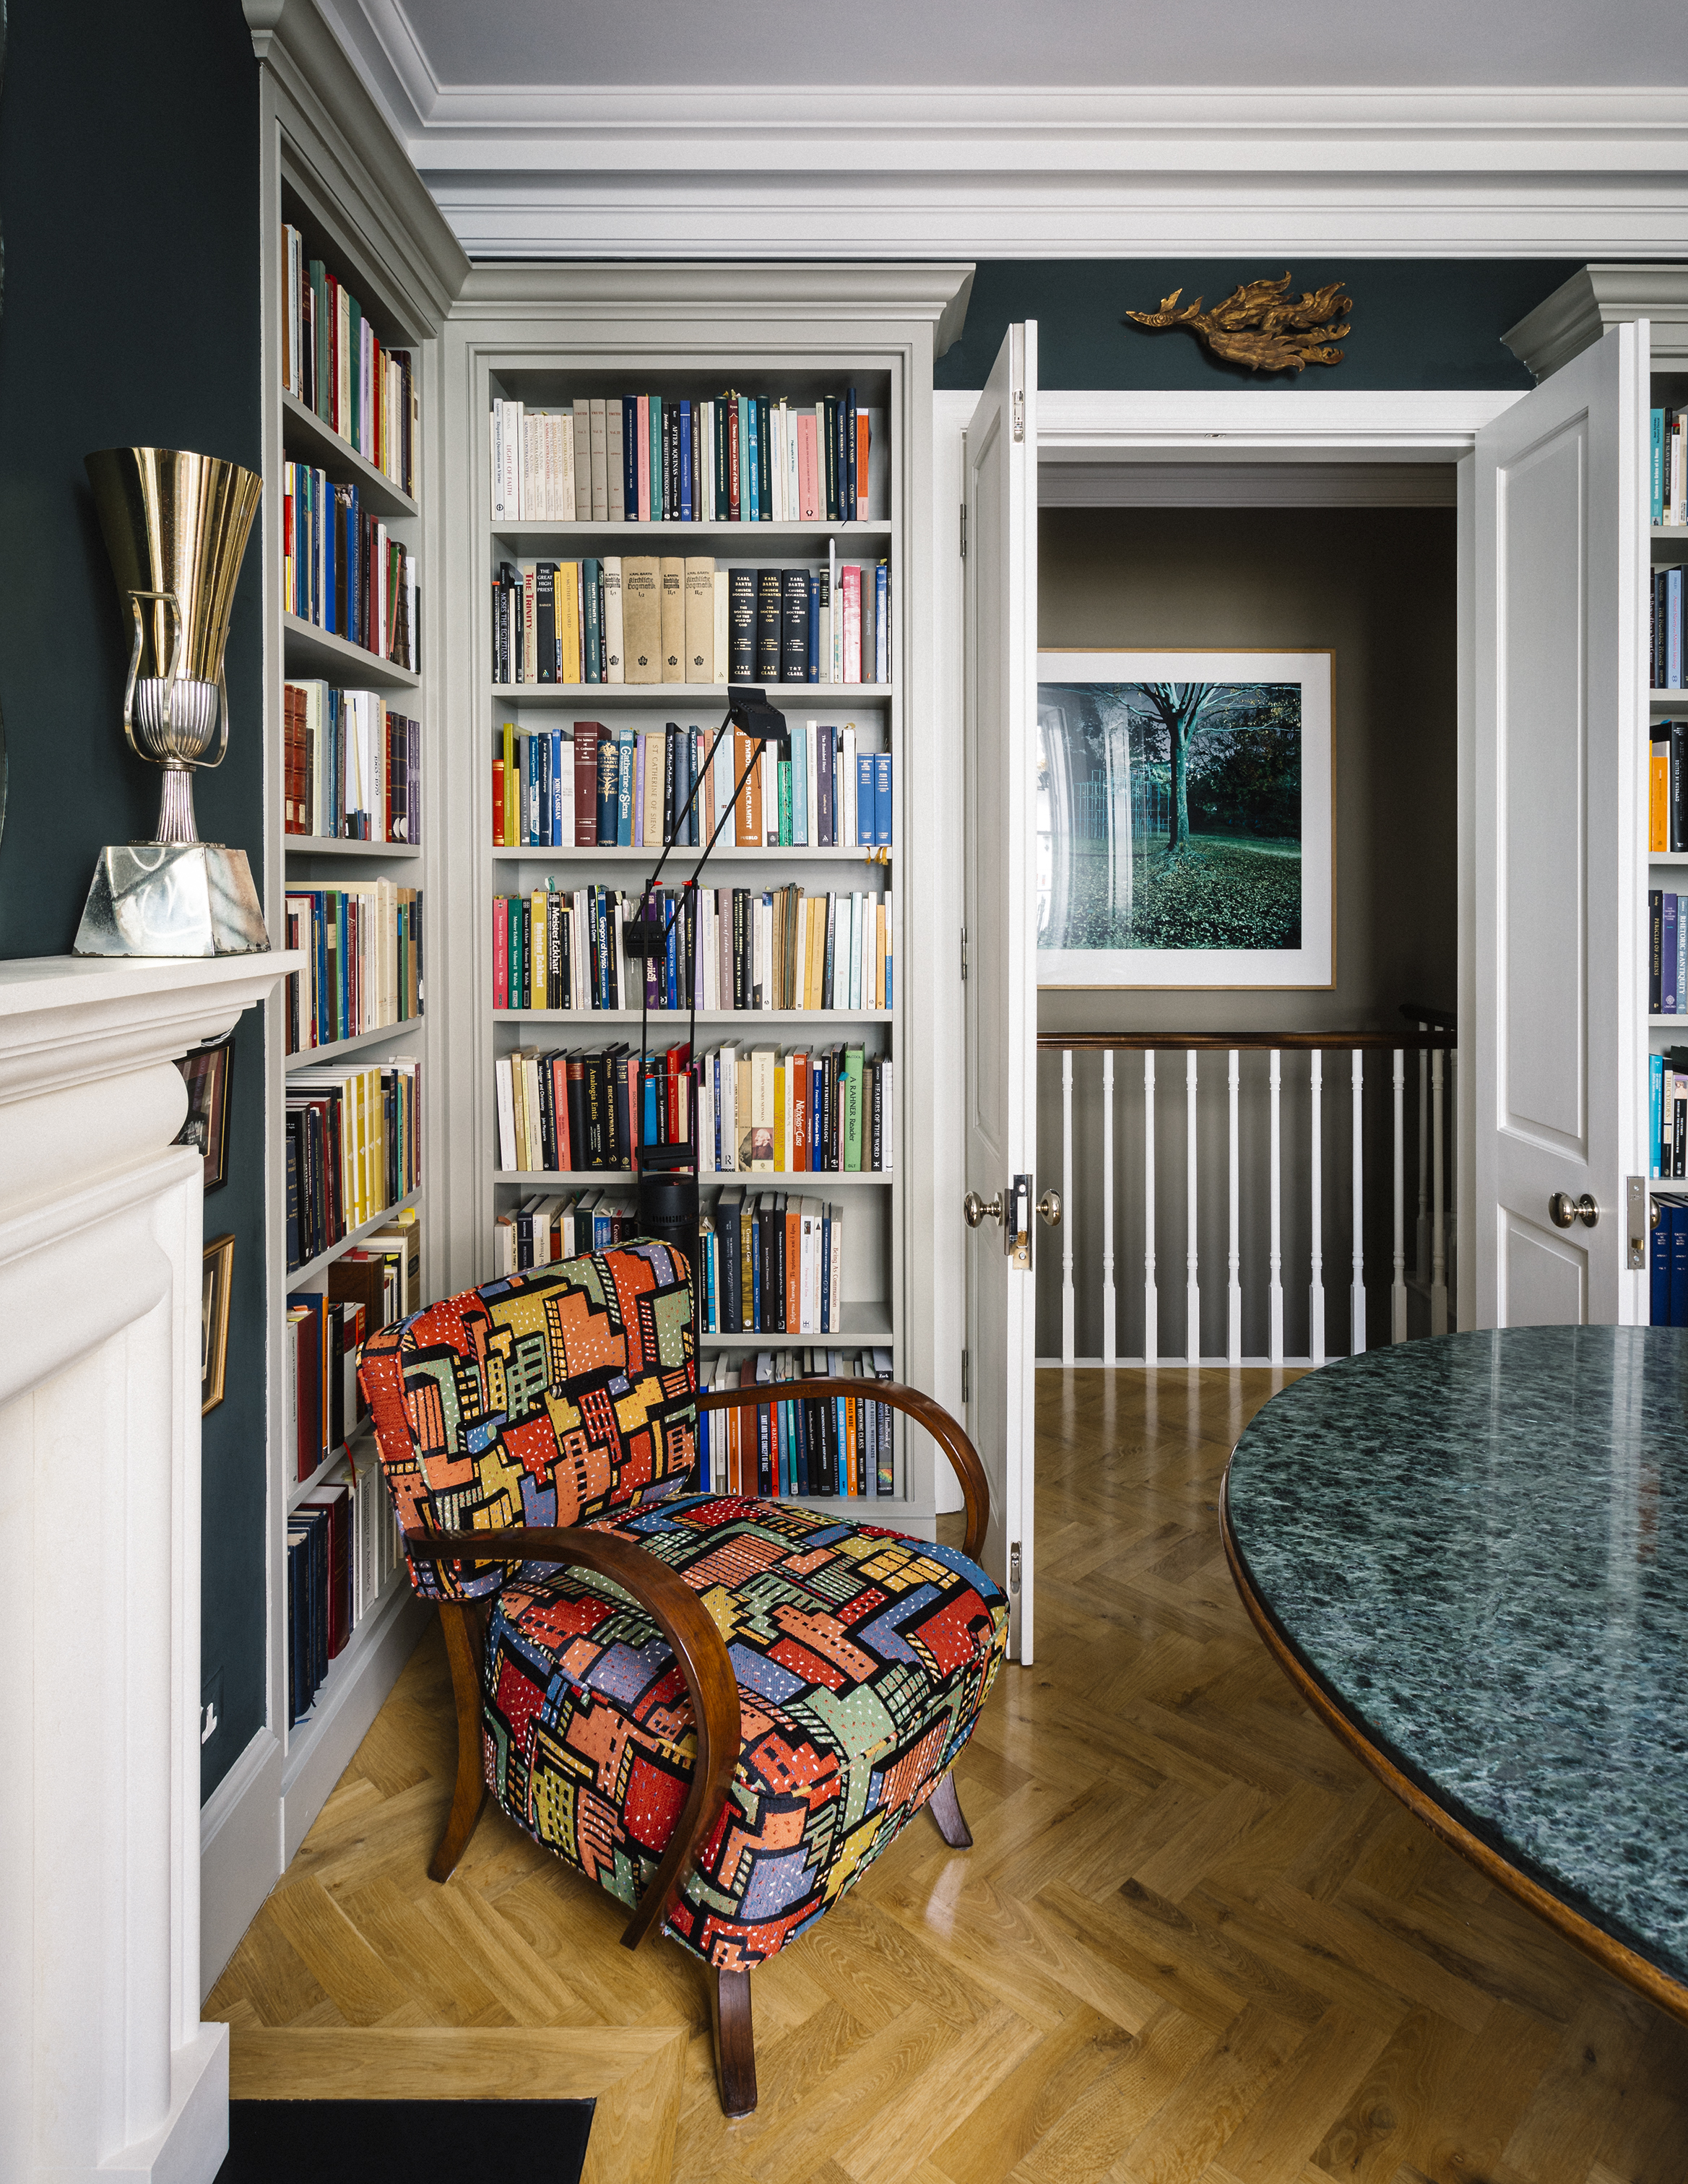 A pair of mid-century modern armchairs are surrounded by bespoke library joinery and earthy green shades